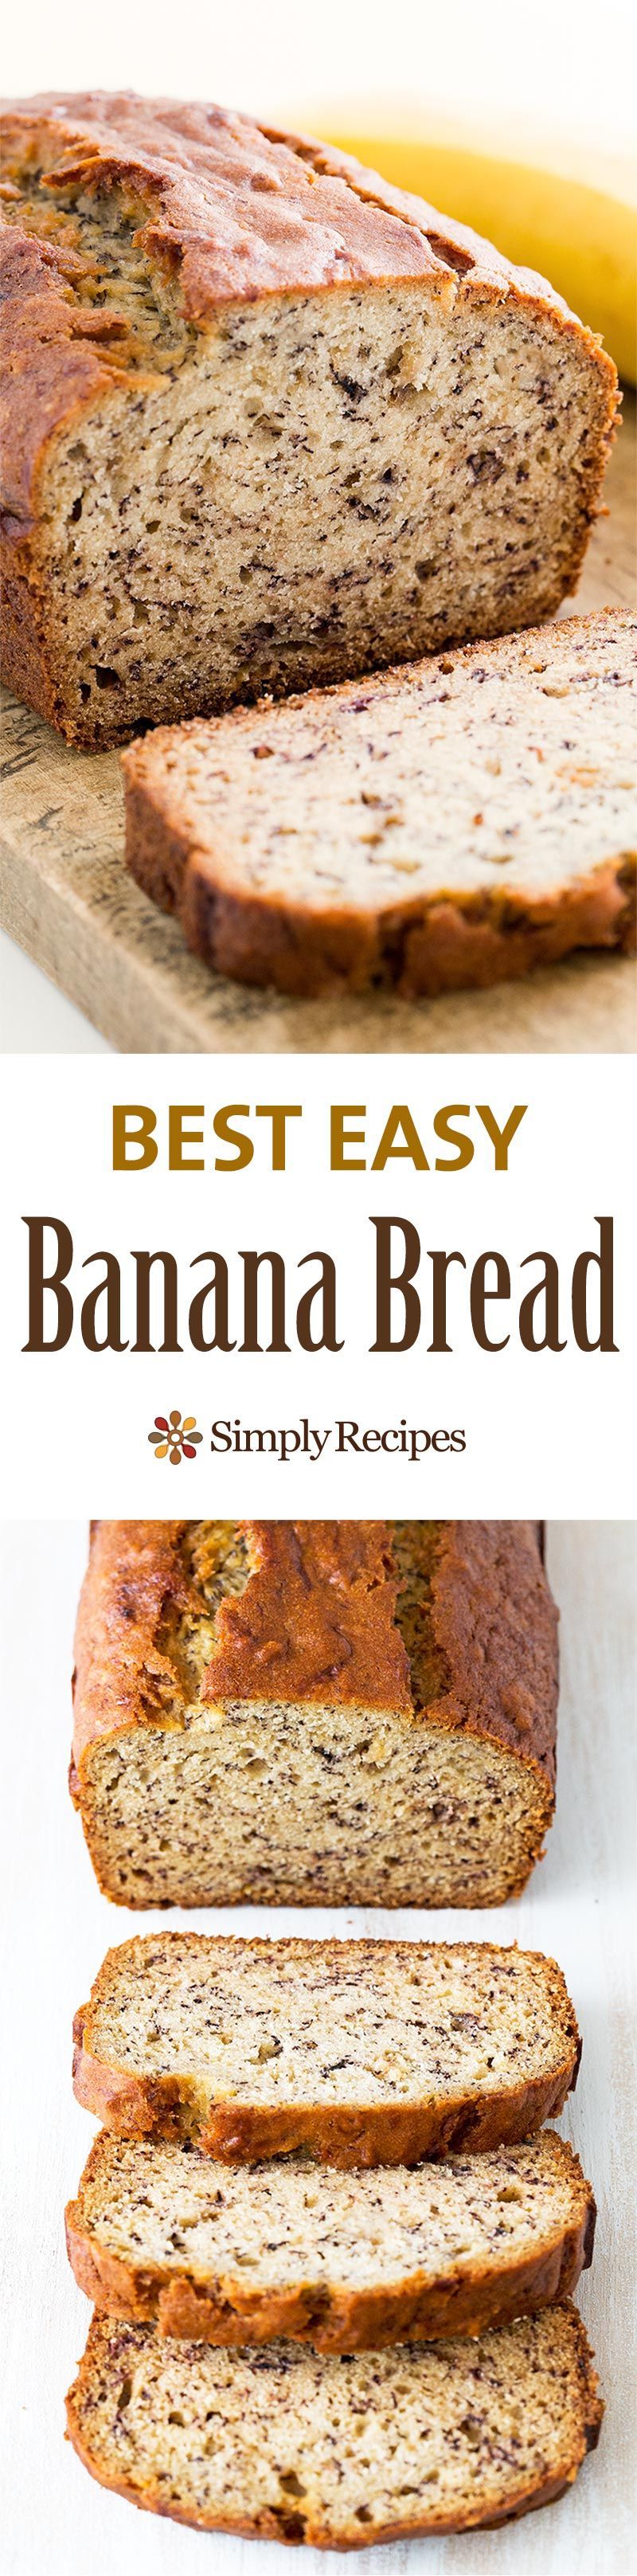 Easiest banana bread ever! No need for a mixer! Delicious and easy, classic banana bread recipe. Most popular recipe on